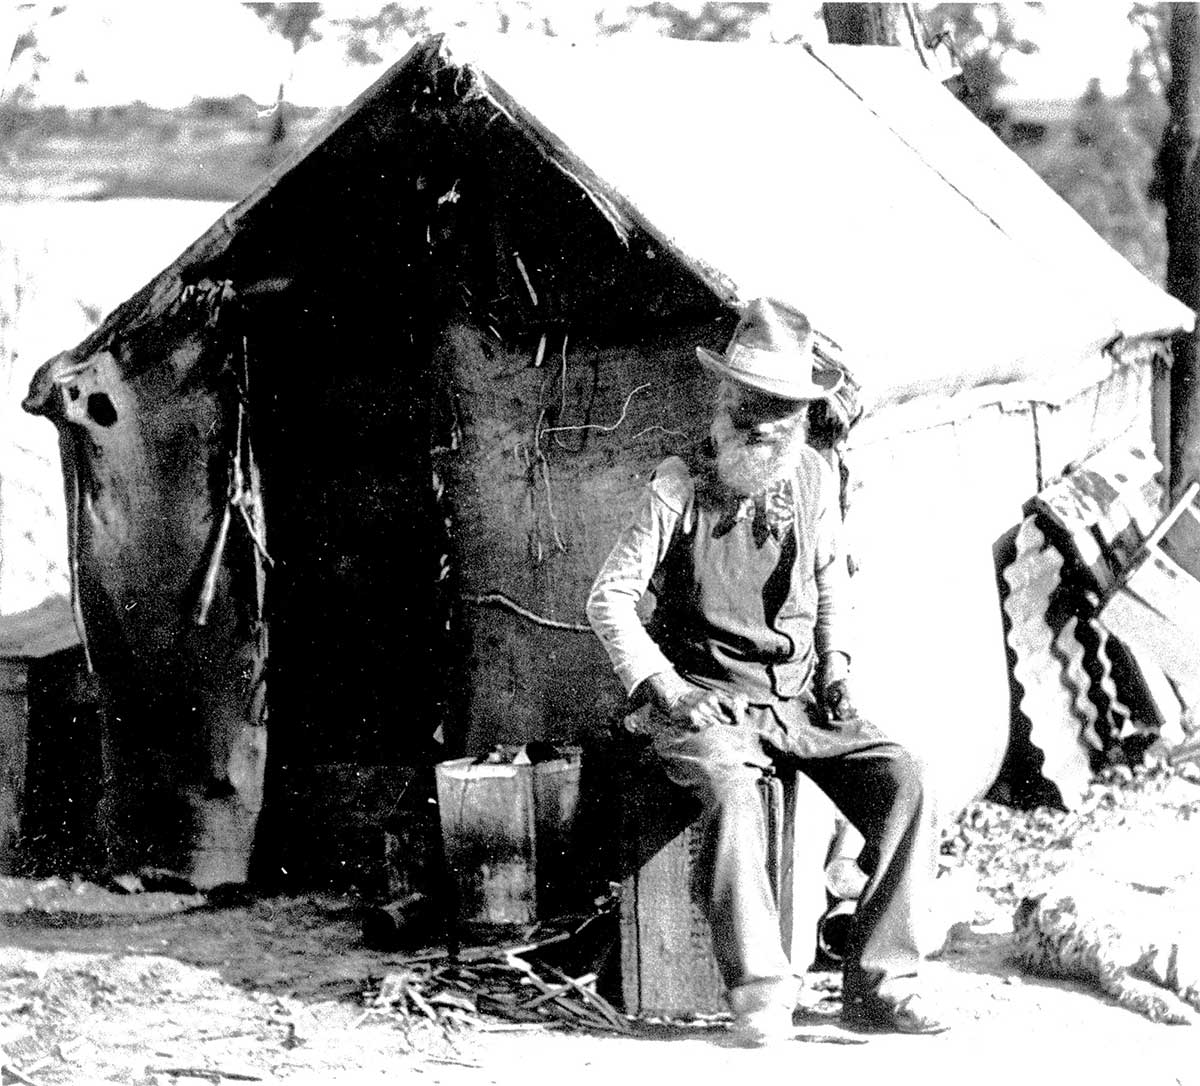 Old man seated on a crate in front of his simple dwelling with a dog at his feet.